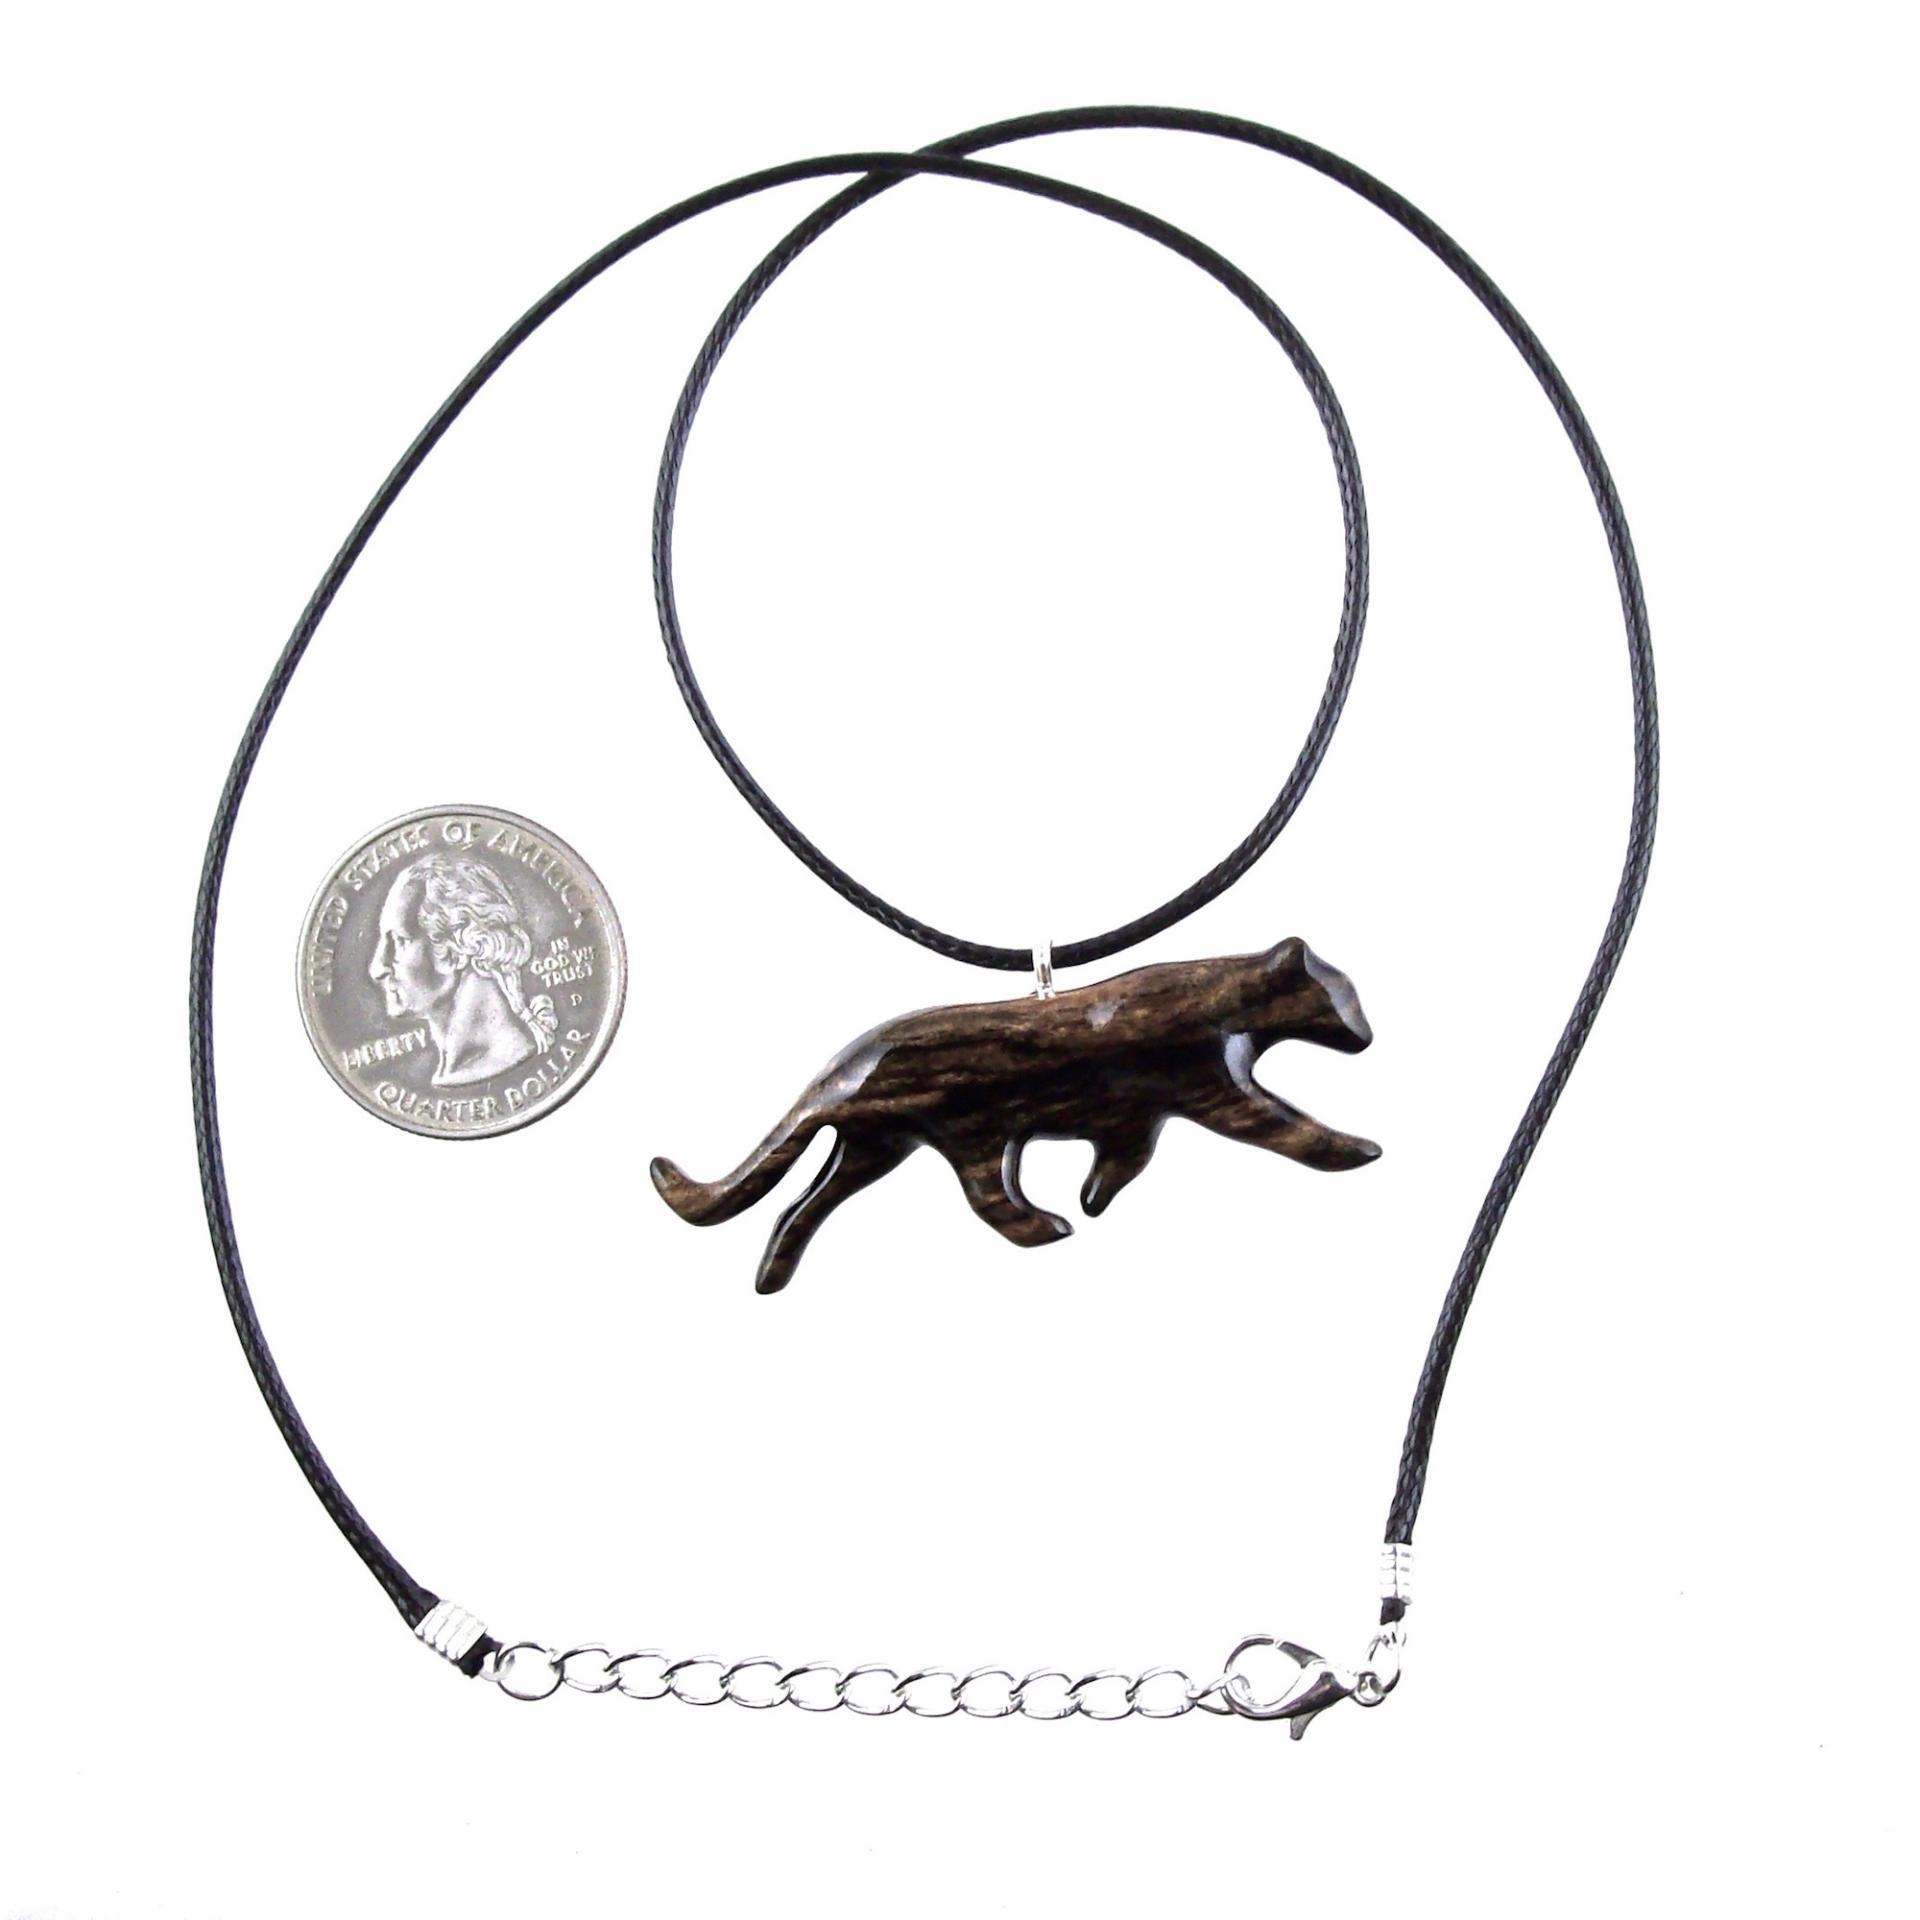 Panther Necklace, Hand Carved Wooden Panther Pendant, Jaguar Necklace, Totem Spirit Animal Wood Jewelry